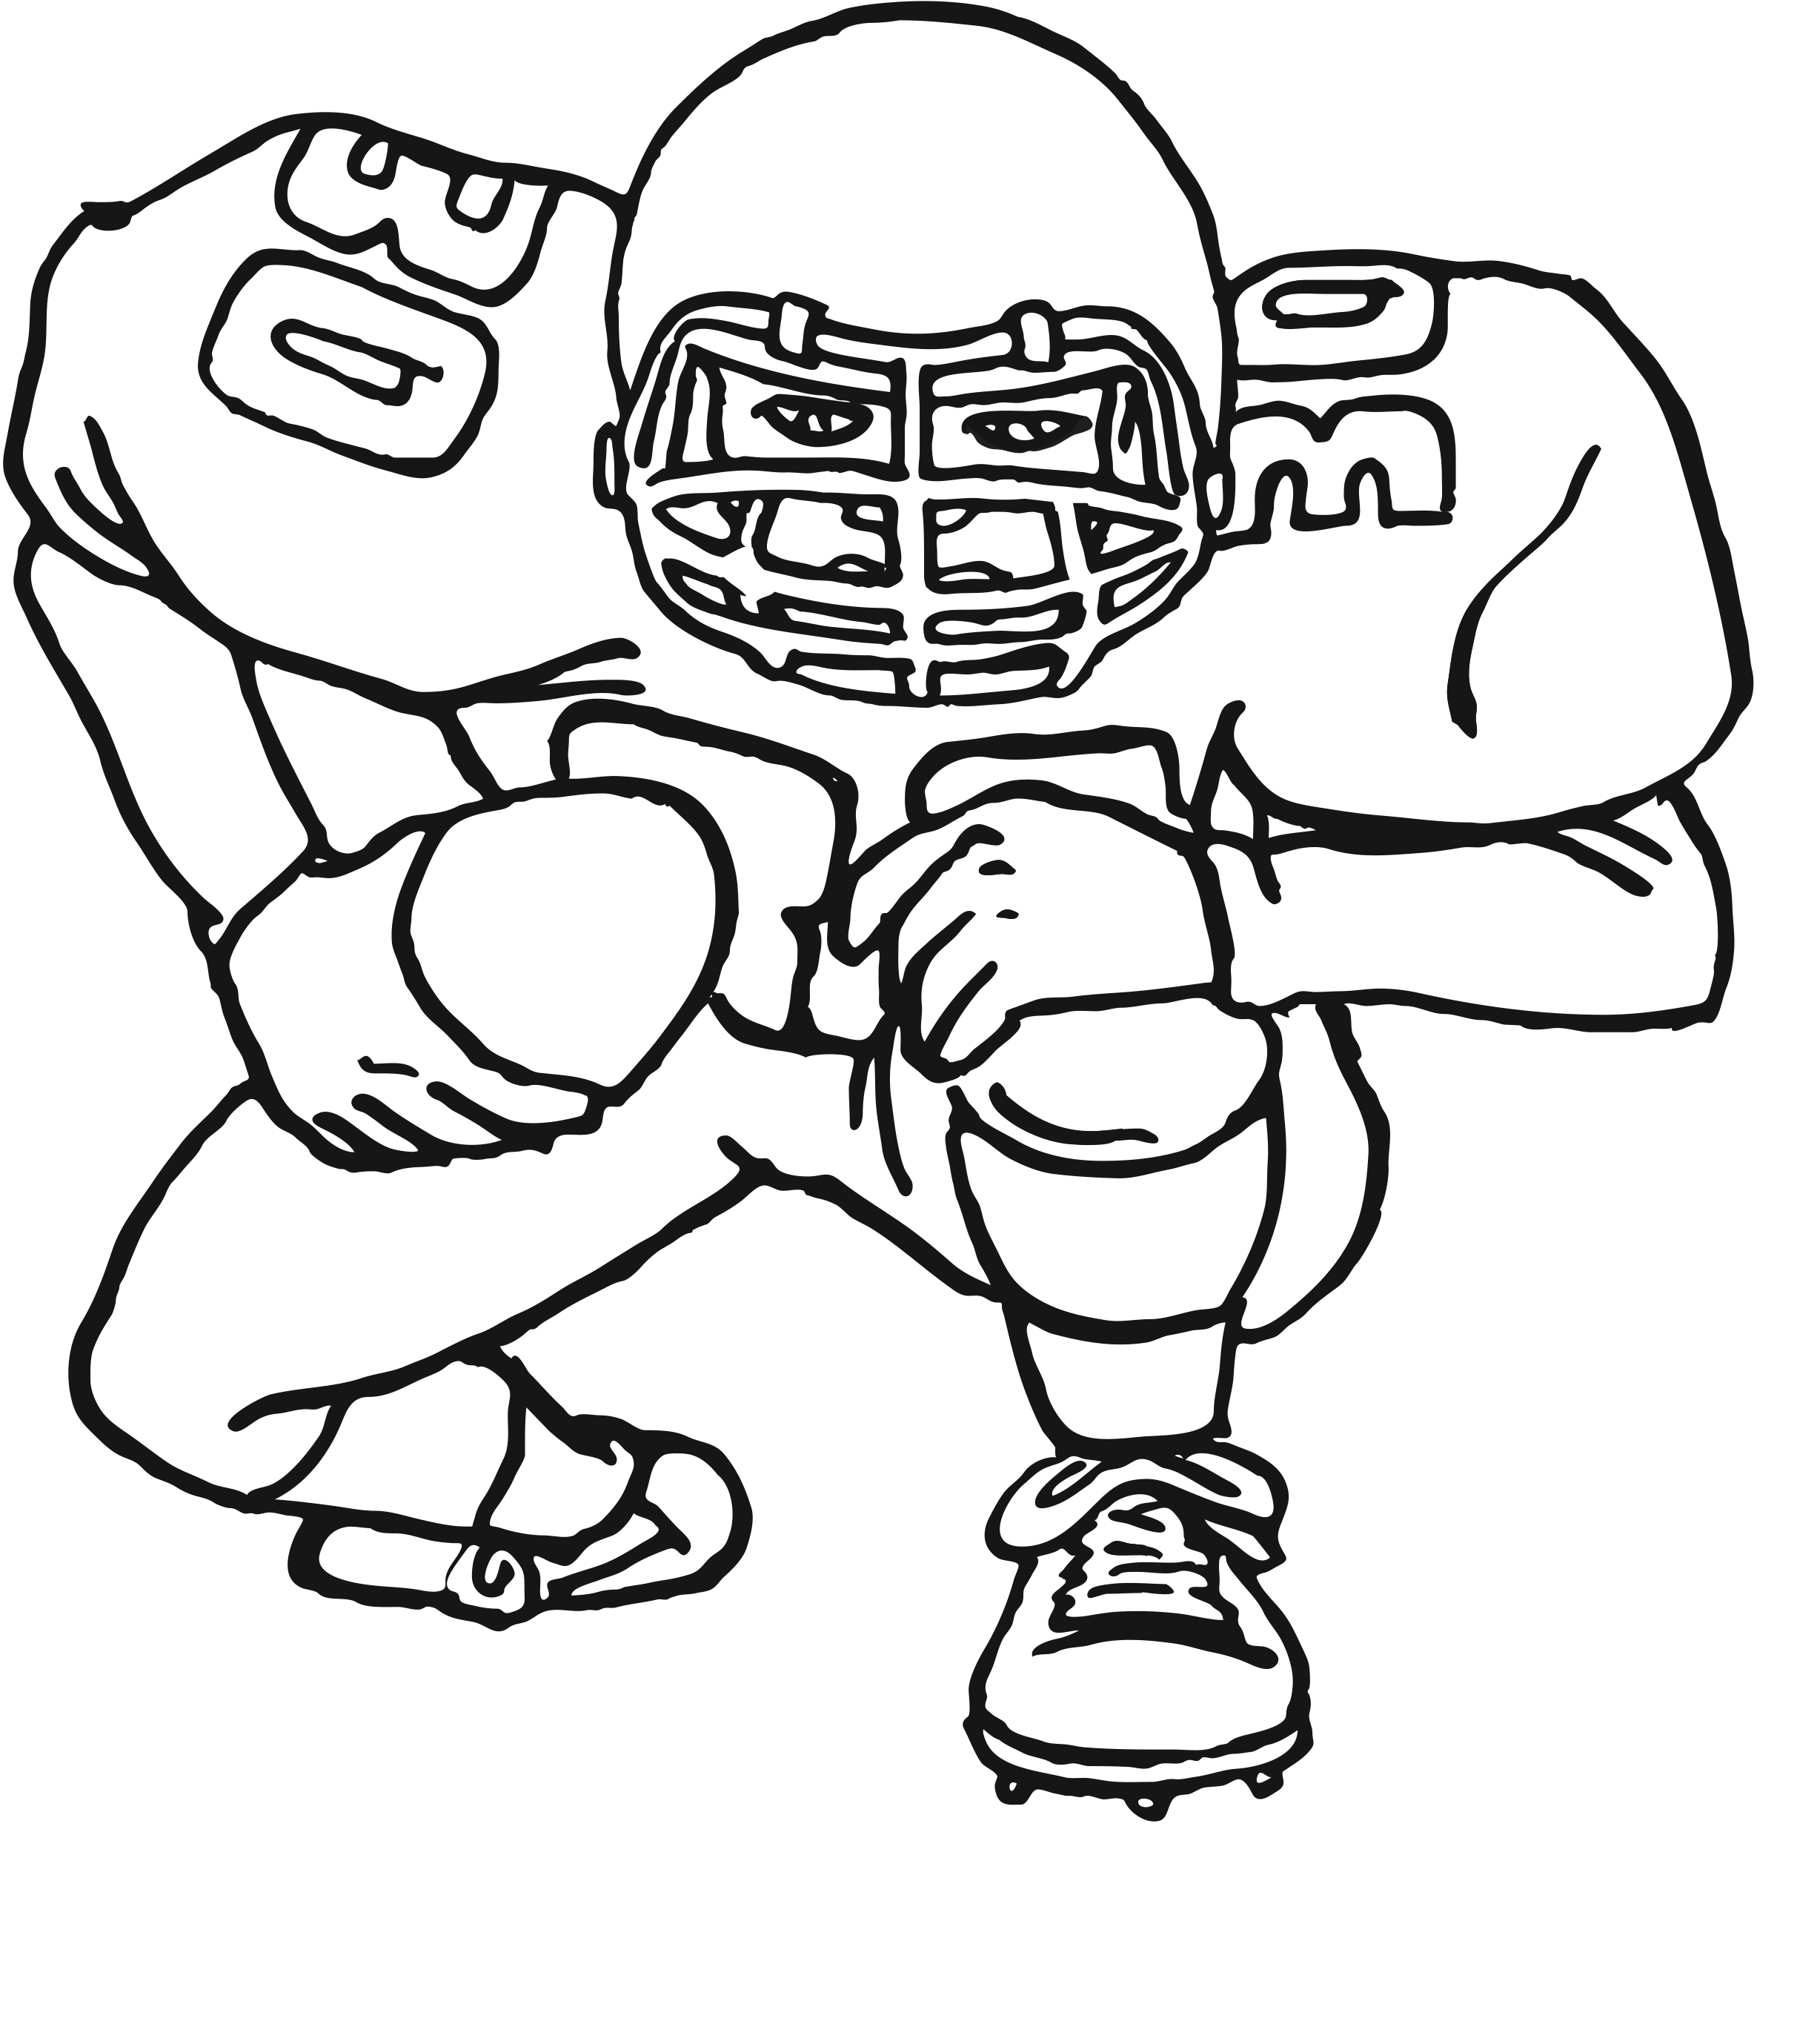 758 Cute Cartoon Sports Coloring Pages for Adult